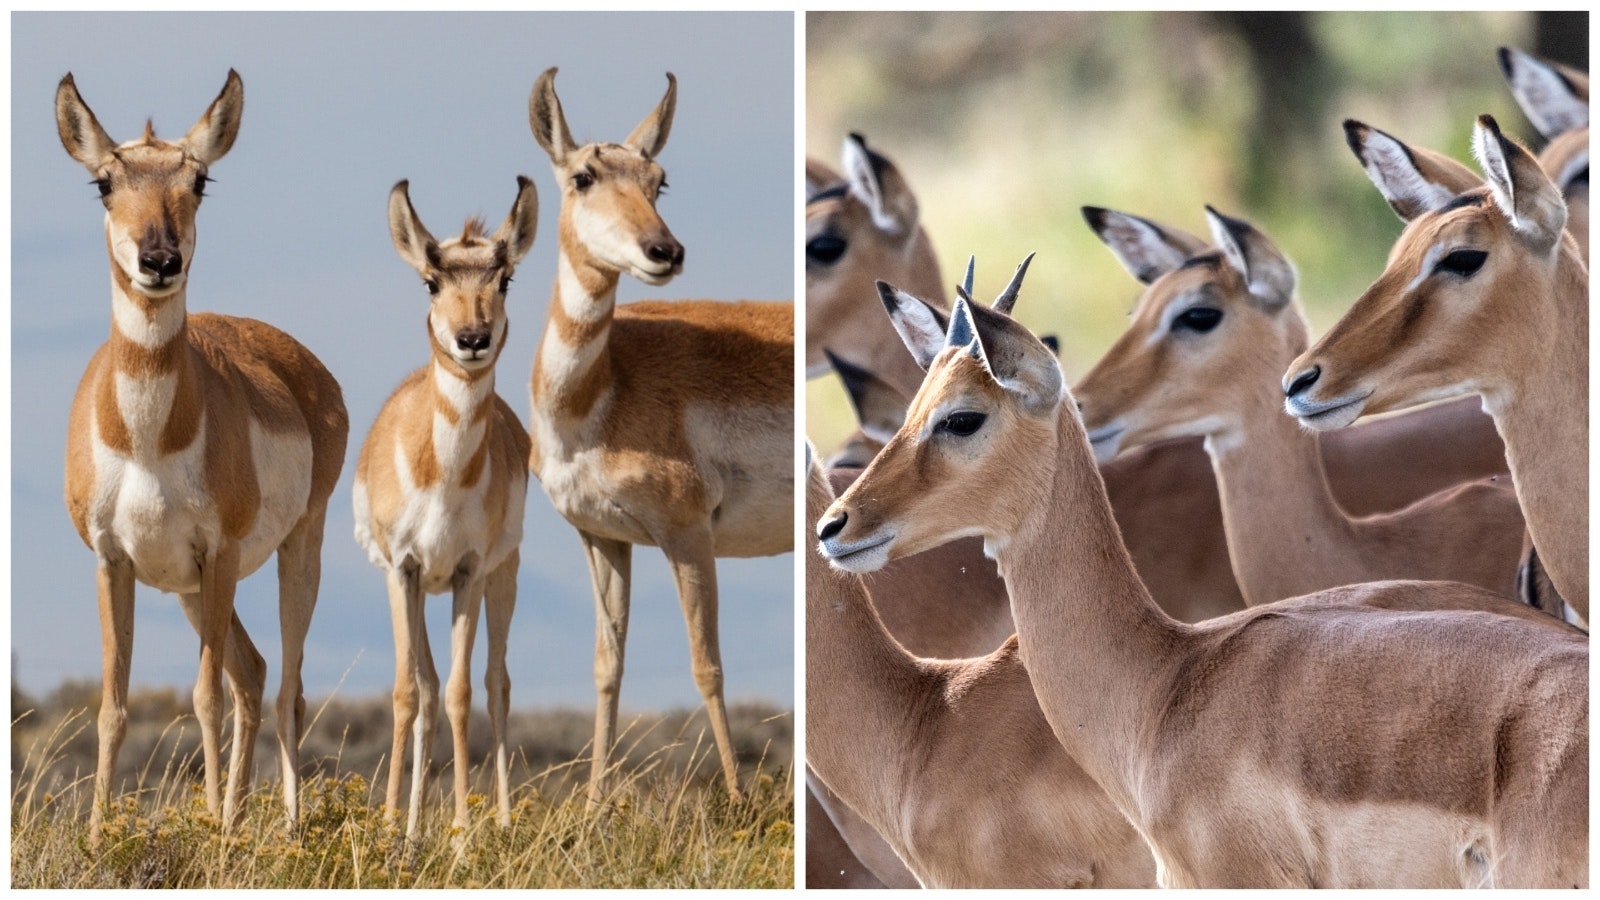 Wyoming pronghorn (left) and African antelope (right).